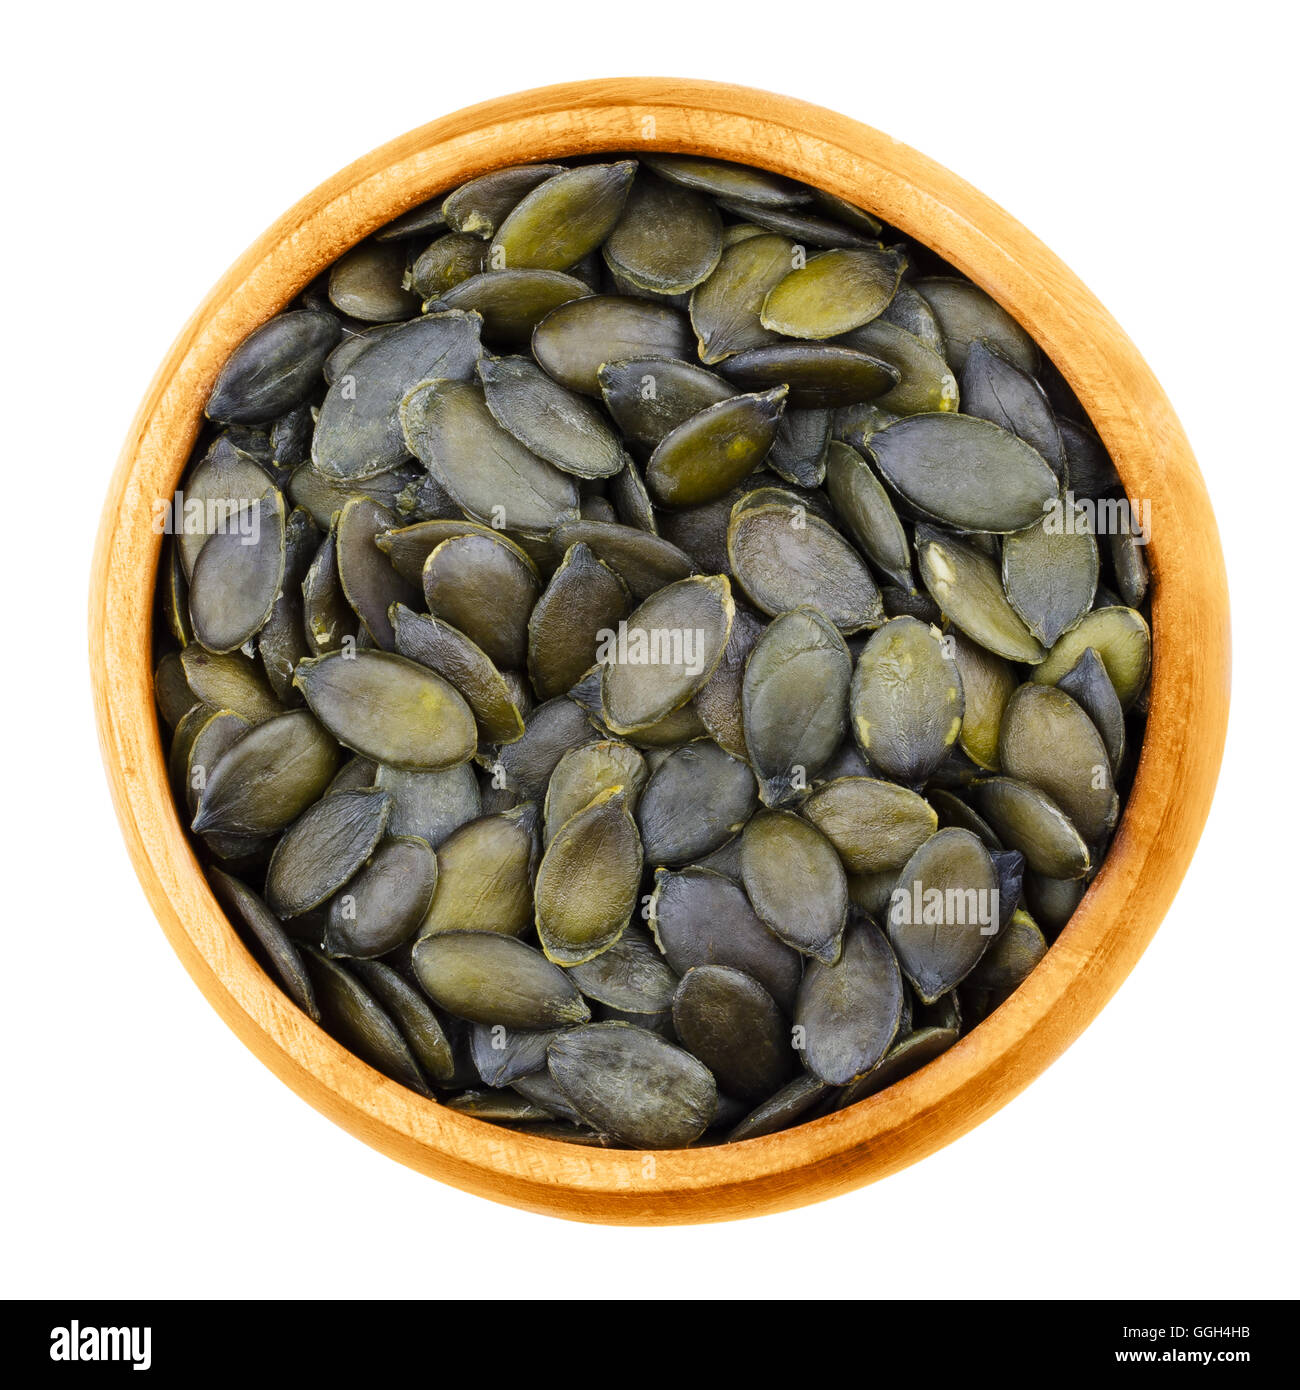 Pepita pumpkin seeds in a bowl on white background. Flat green edible summer squash seeds. Stock Photo